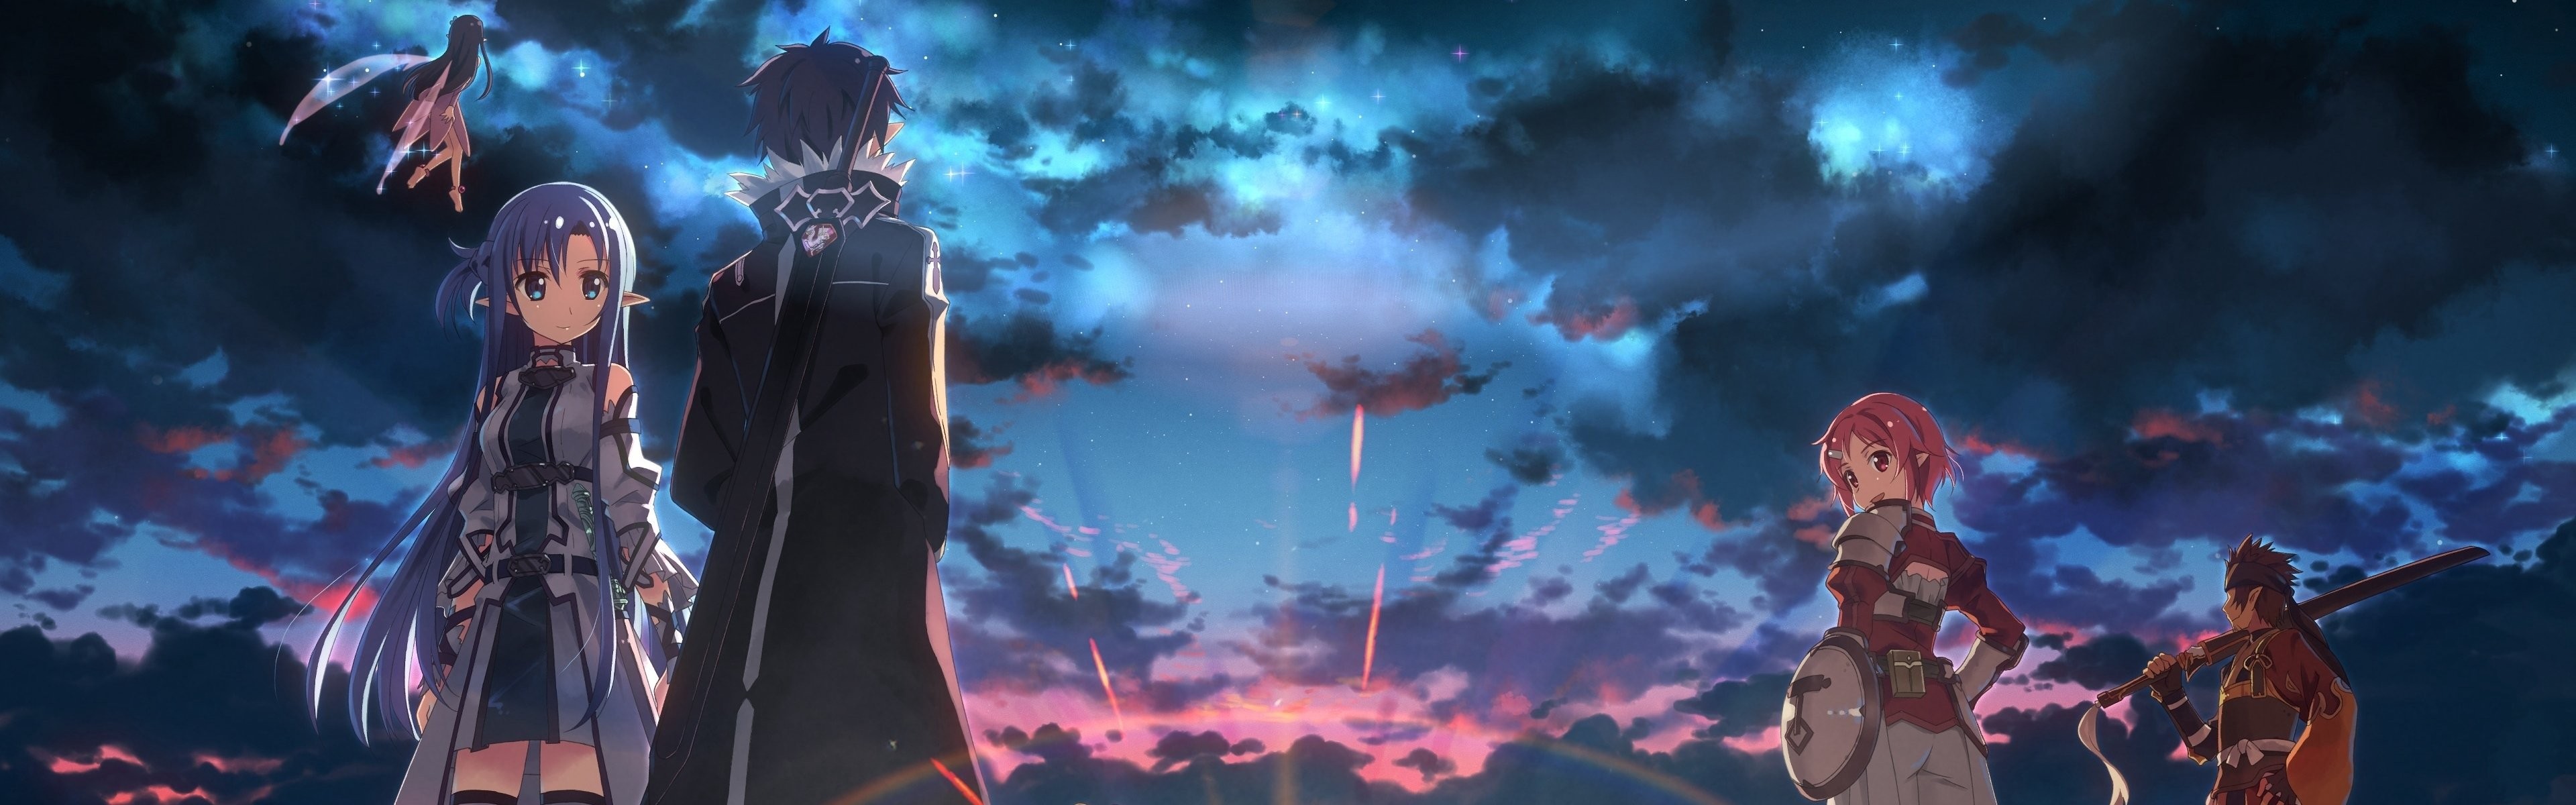 Dual Monitor wallpaper Anime ·① Download free awesome ...